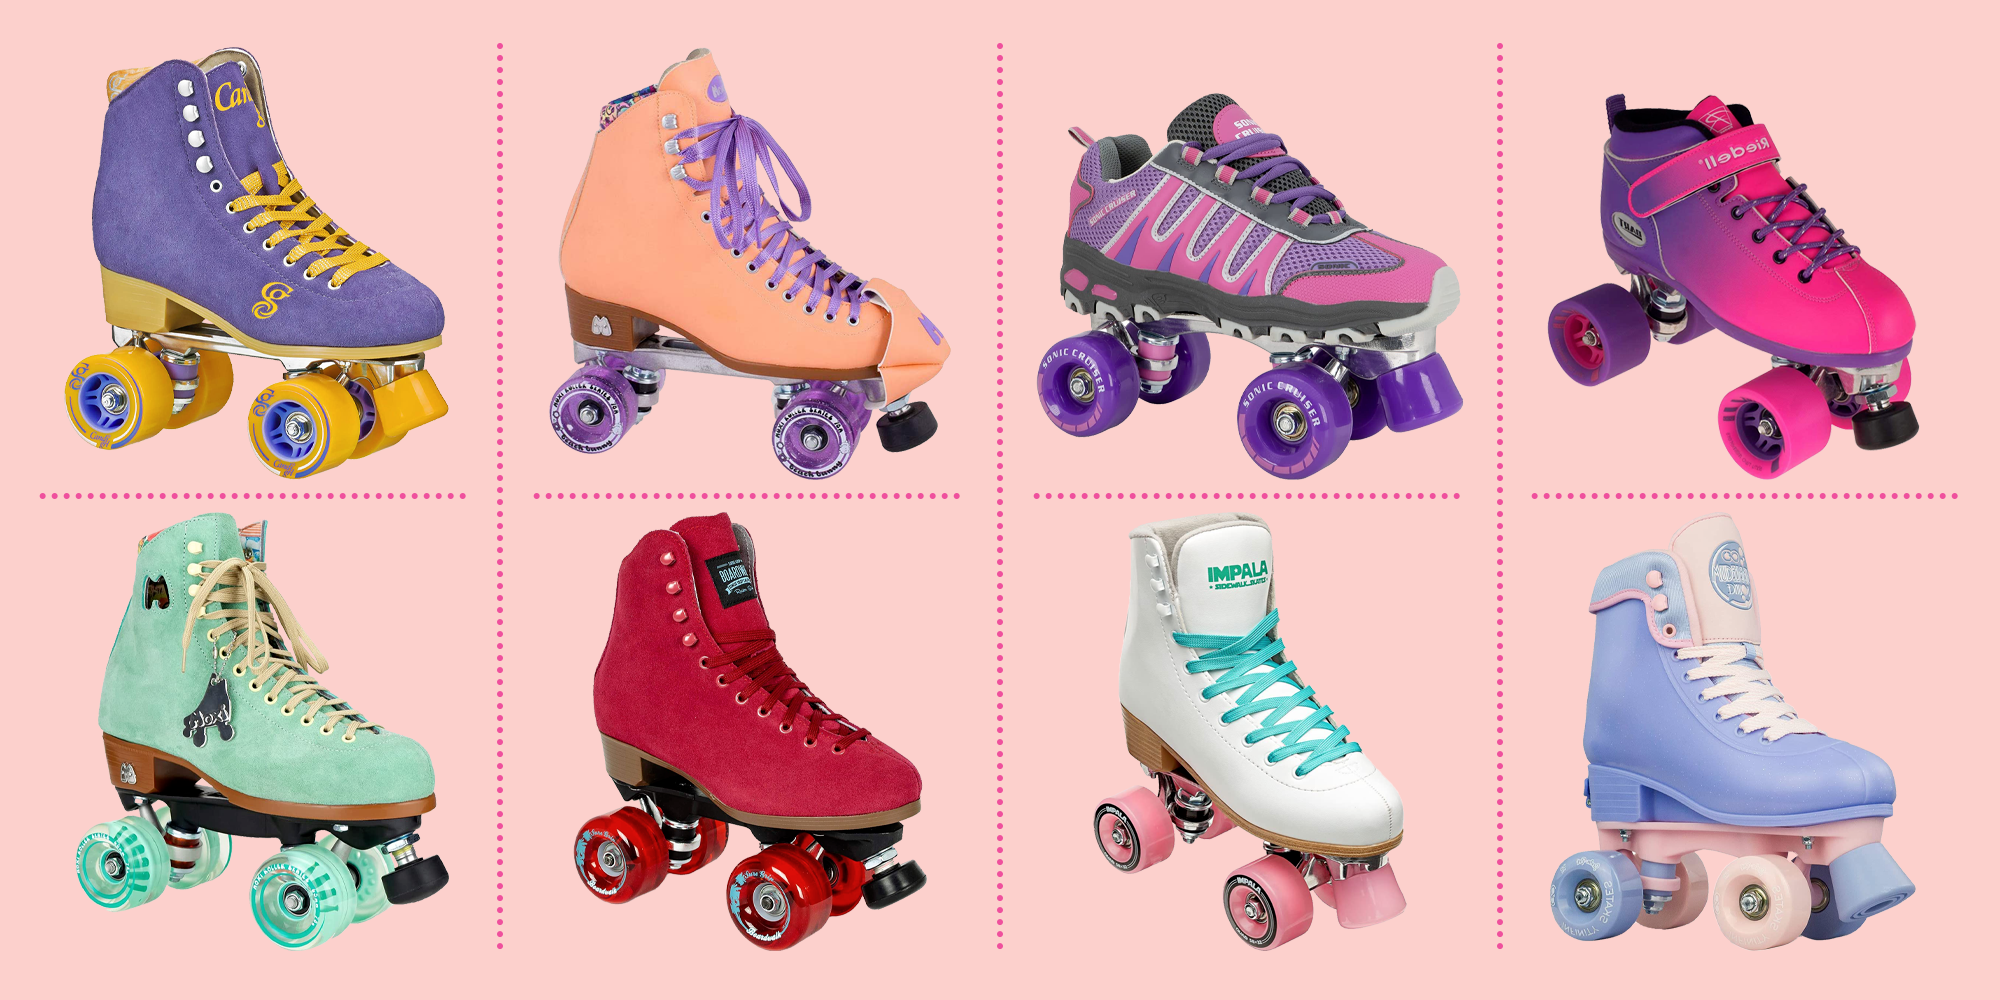 Professional Artificial Leather Roller Skates are Suitable for Adult Men and Women and Beginners Indoor and Outdoor Roller Skates 